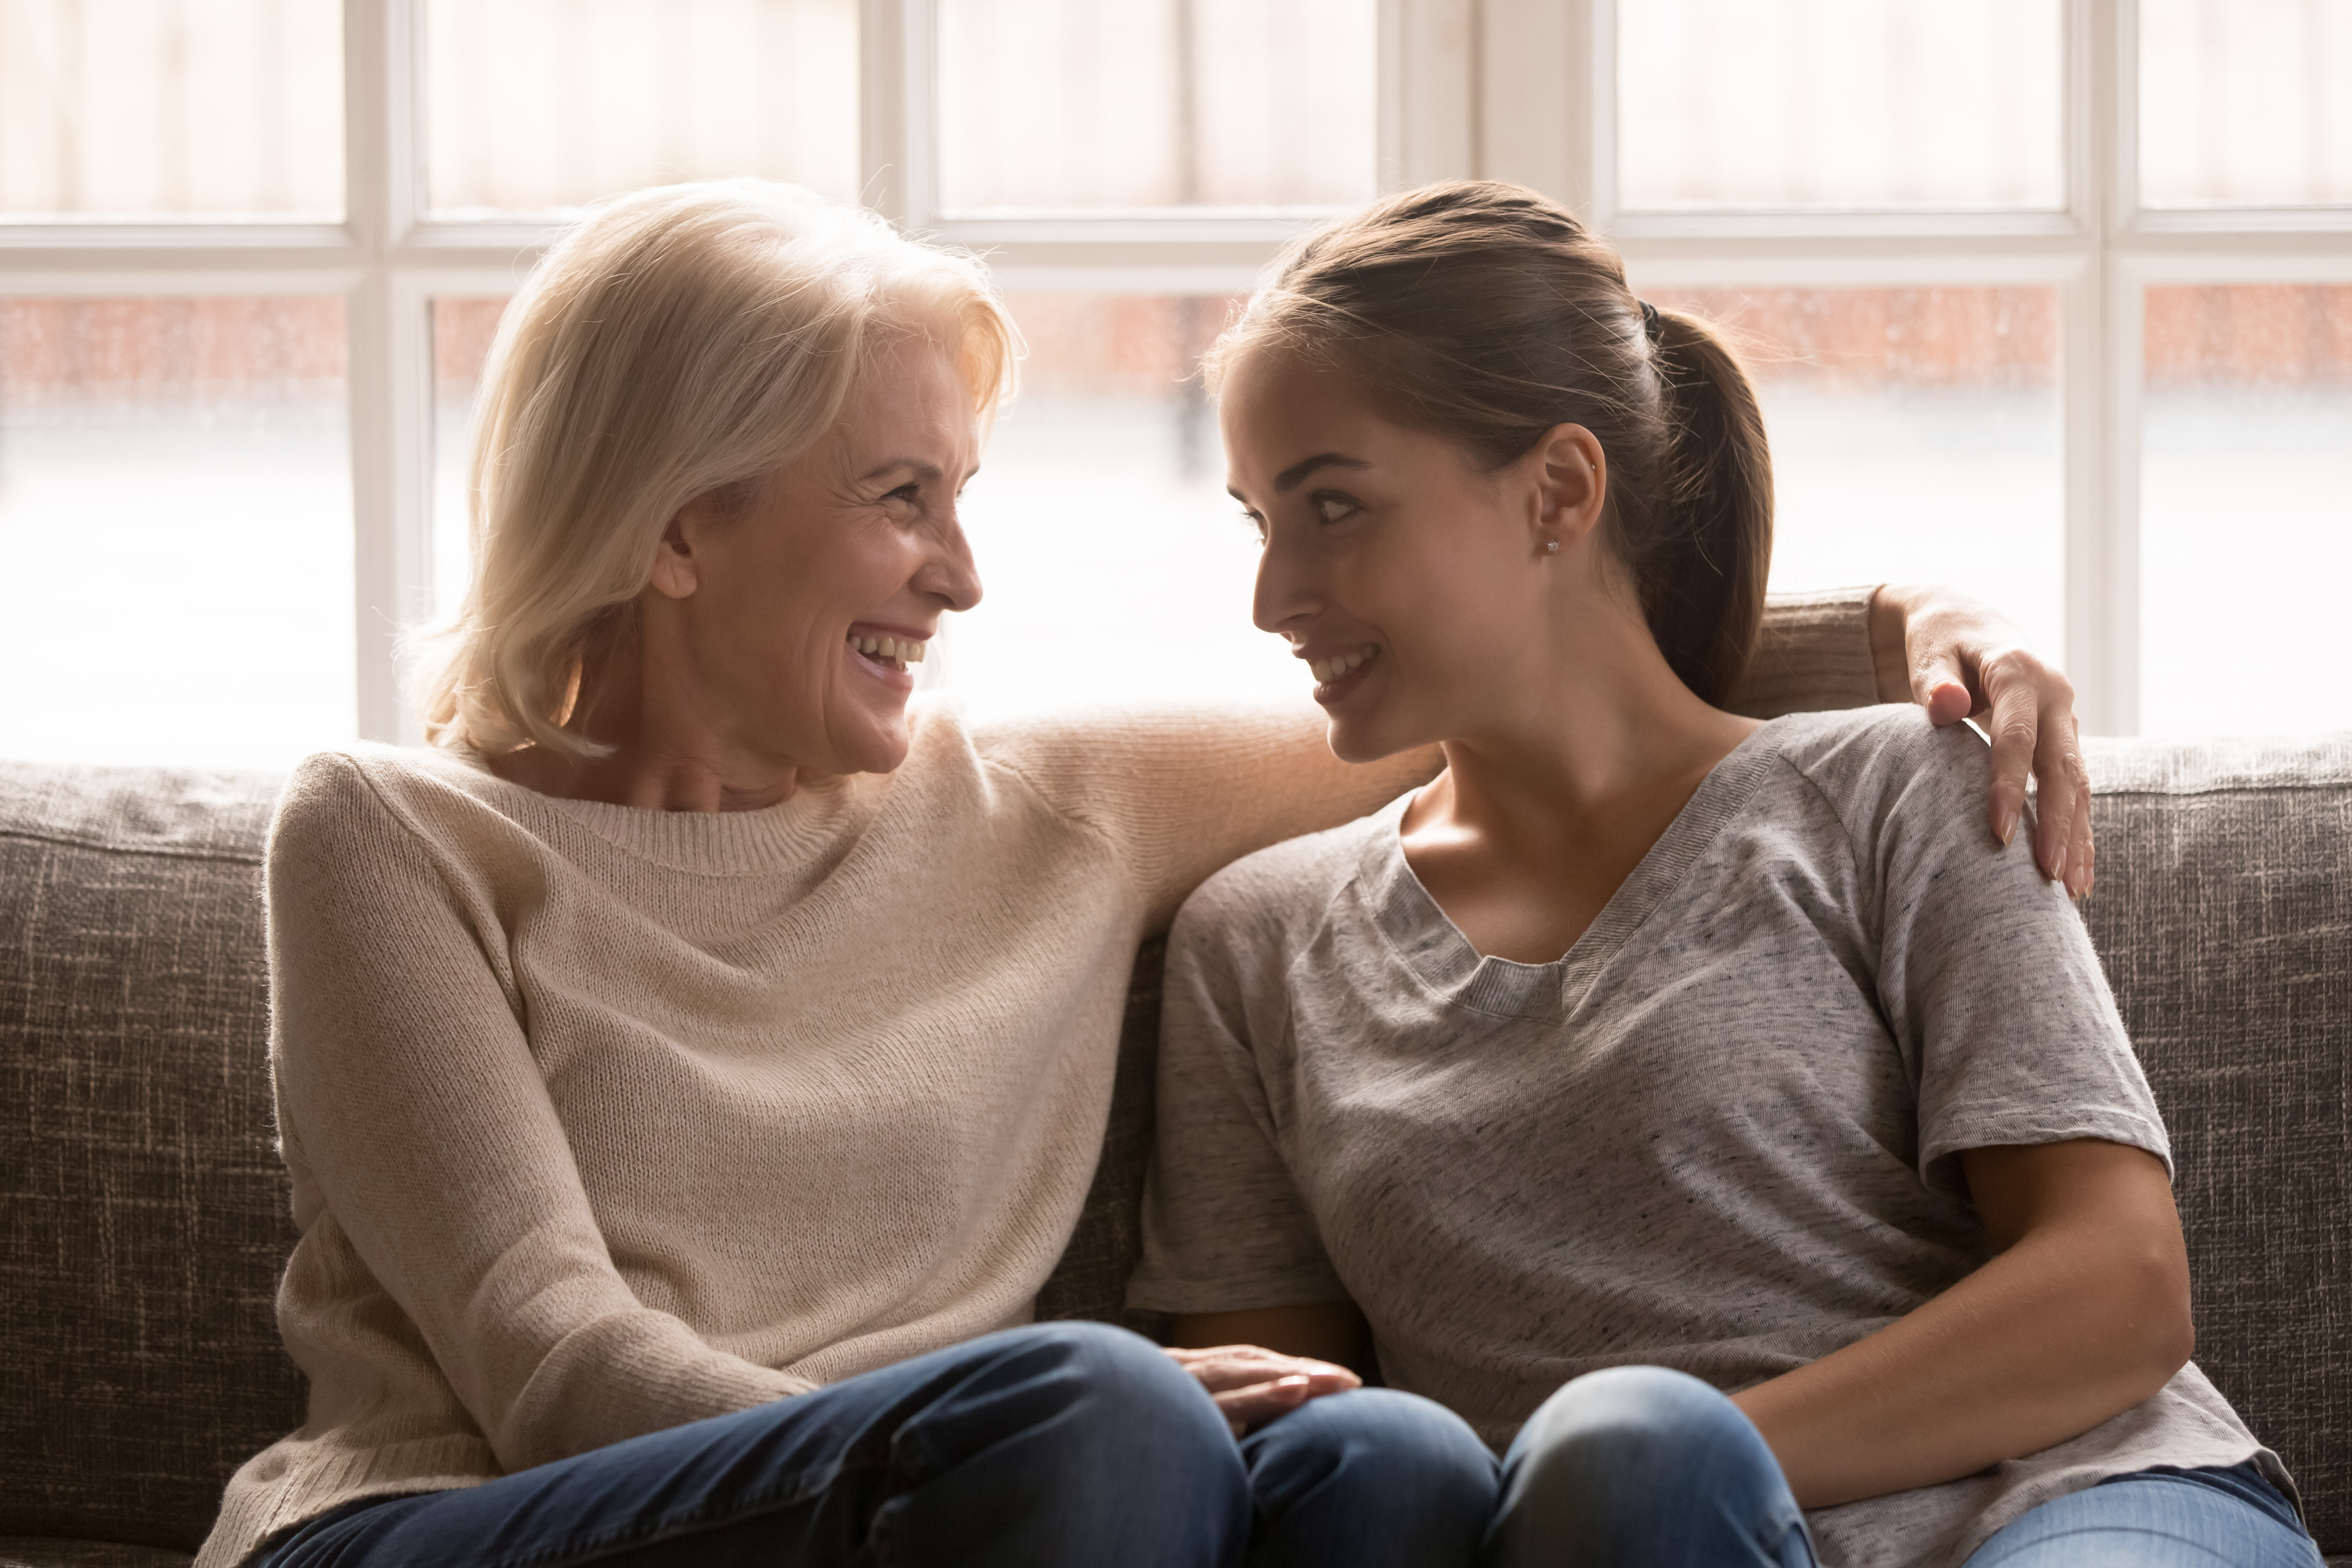 An older woman and a younger woman smiling at each other | Source: Shutterstock